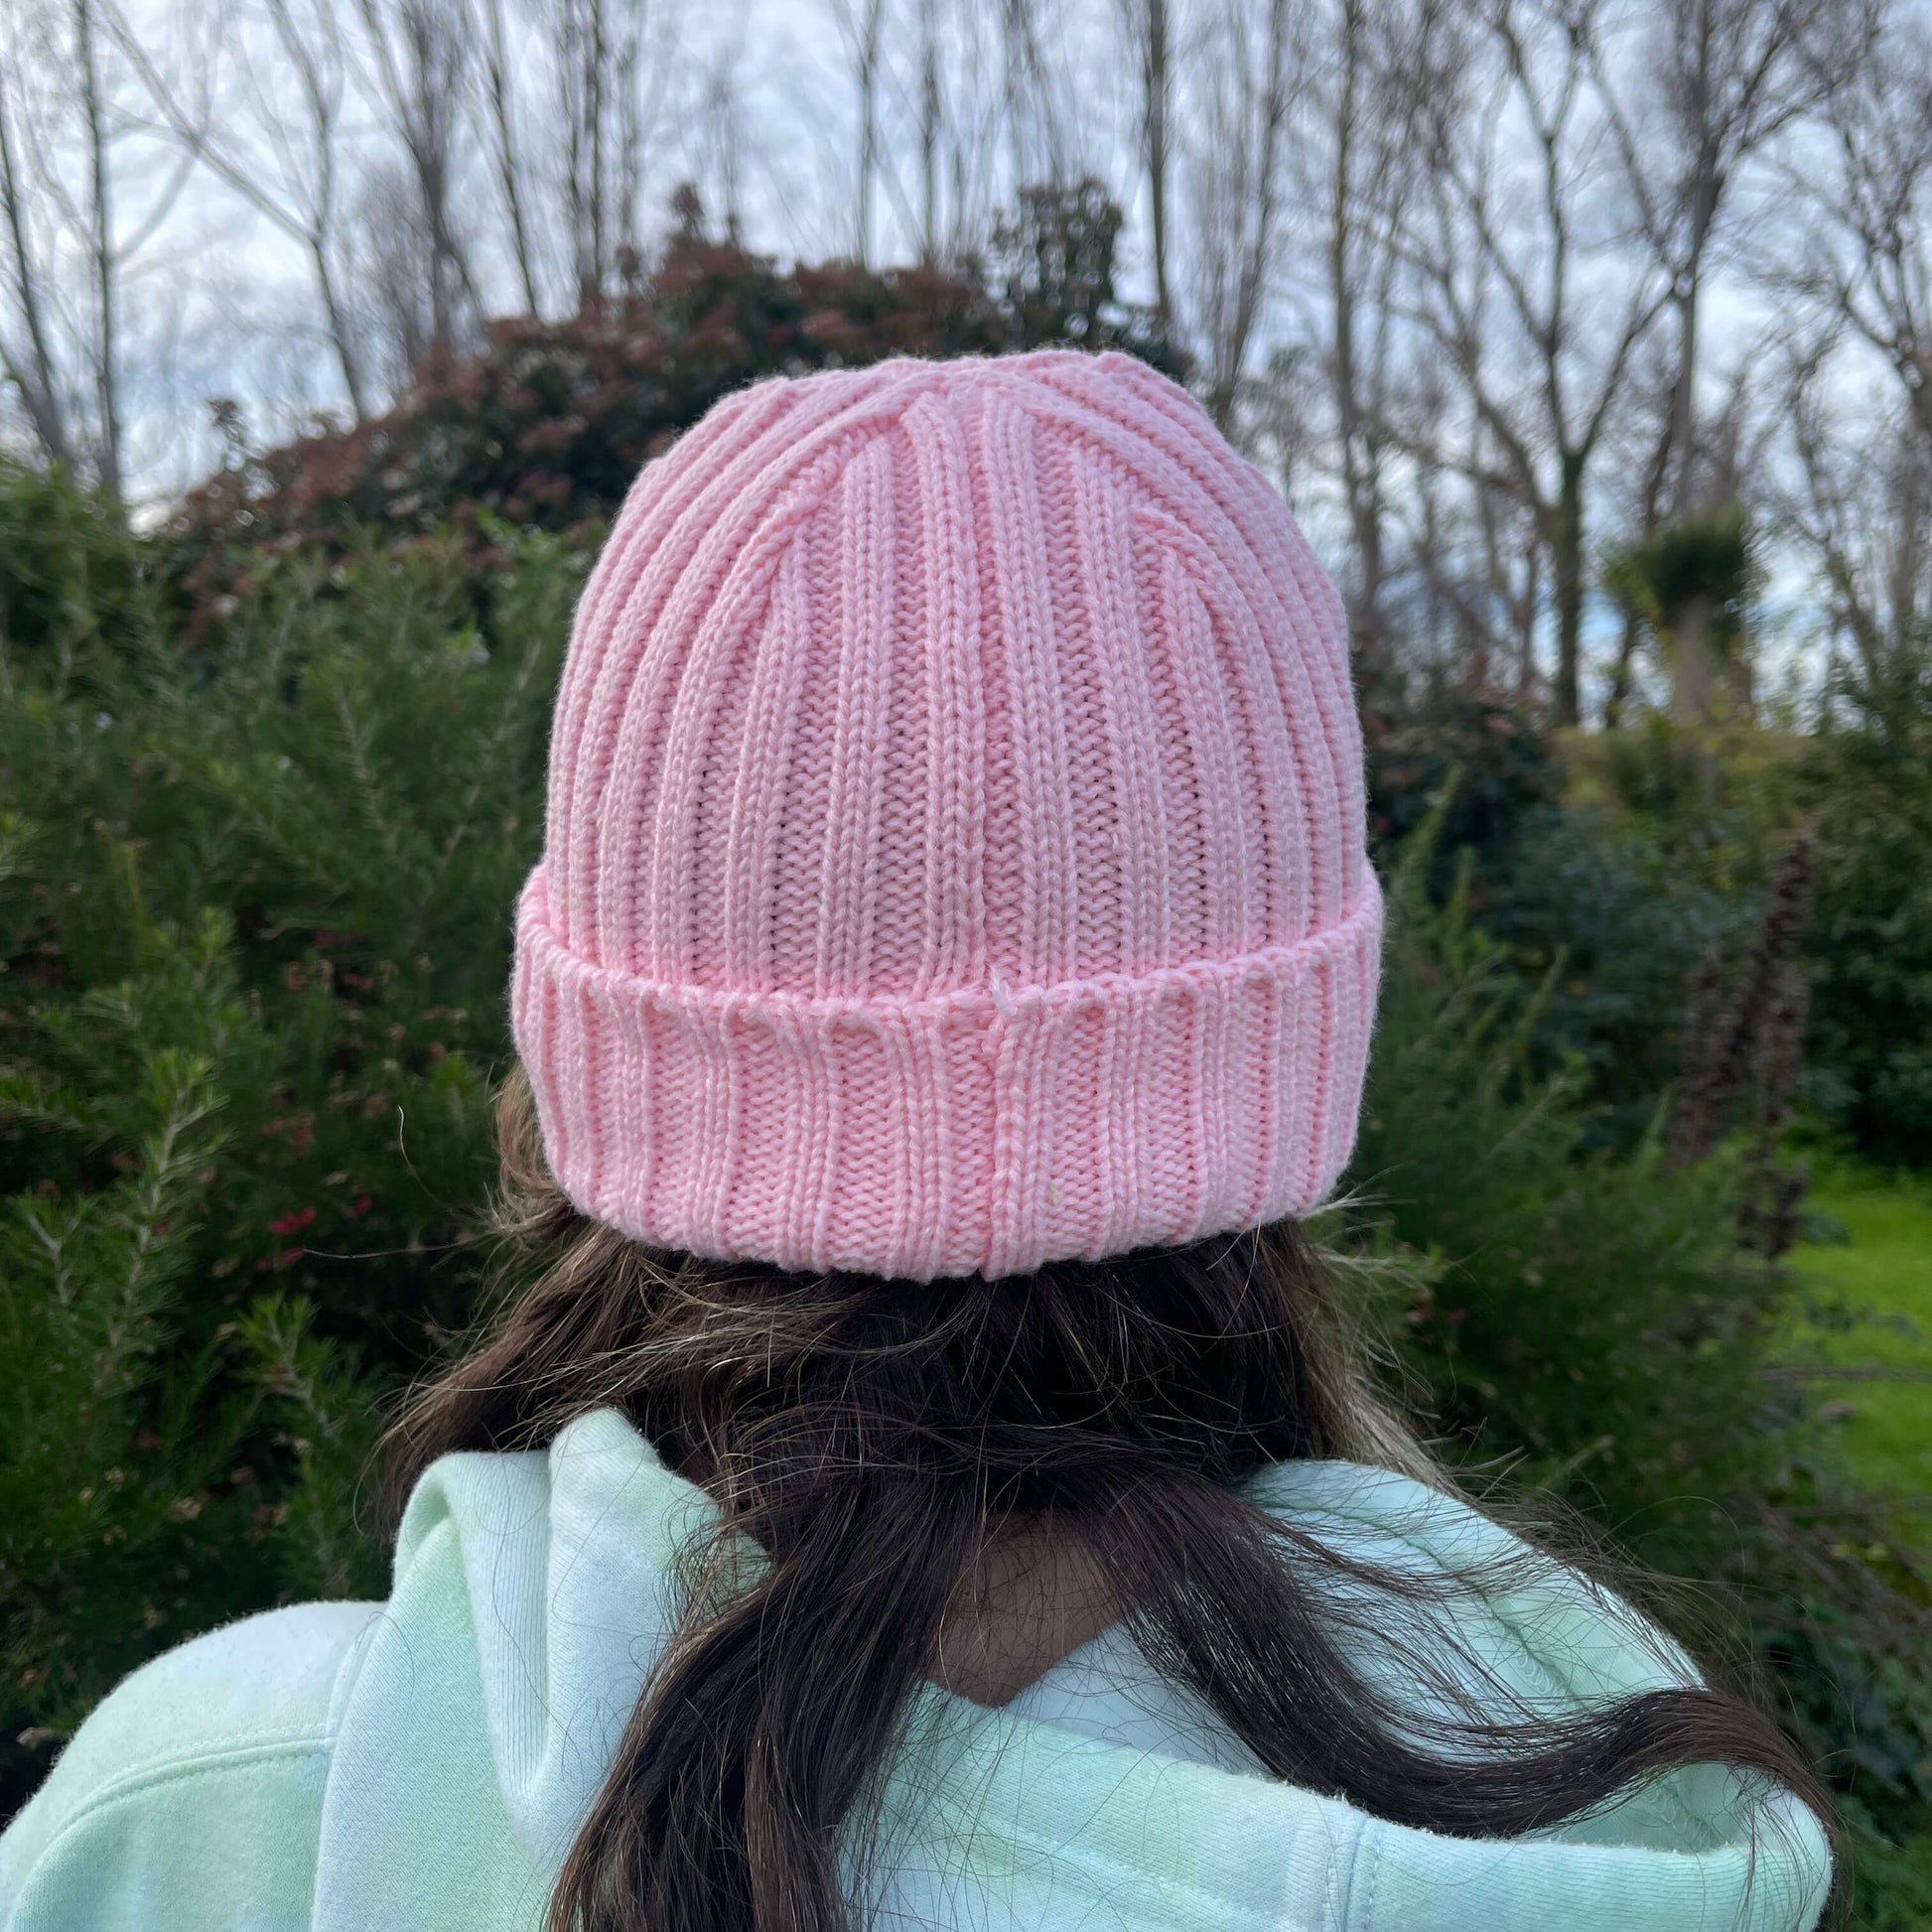 Child wearing pink knit beanie, back view.